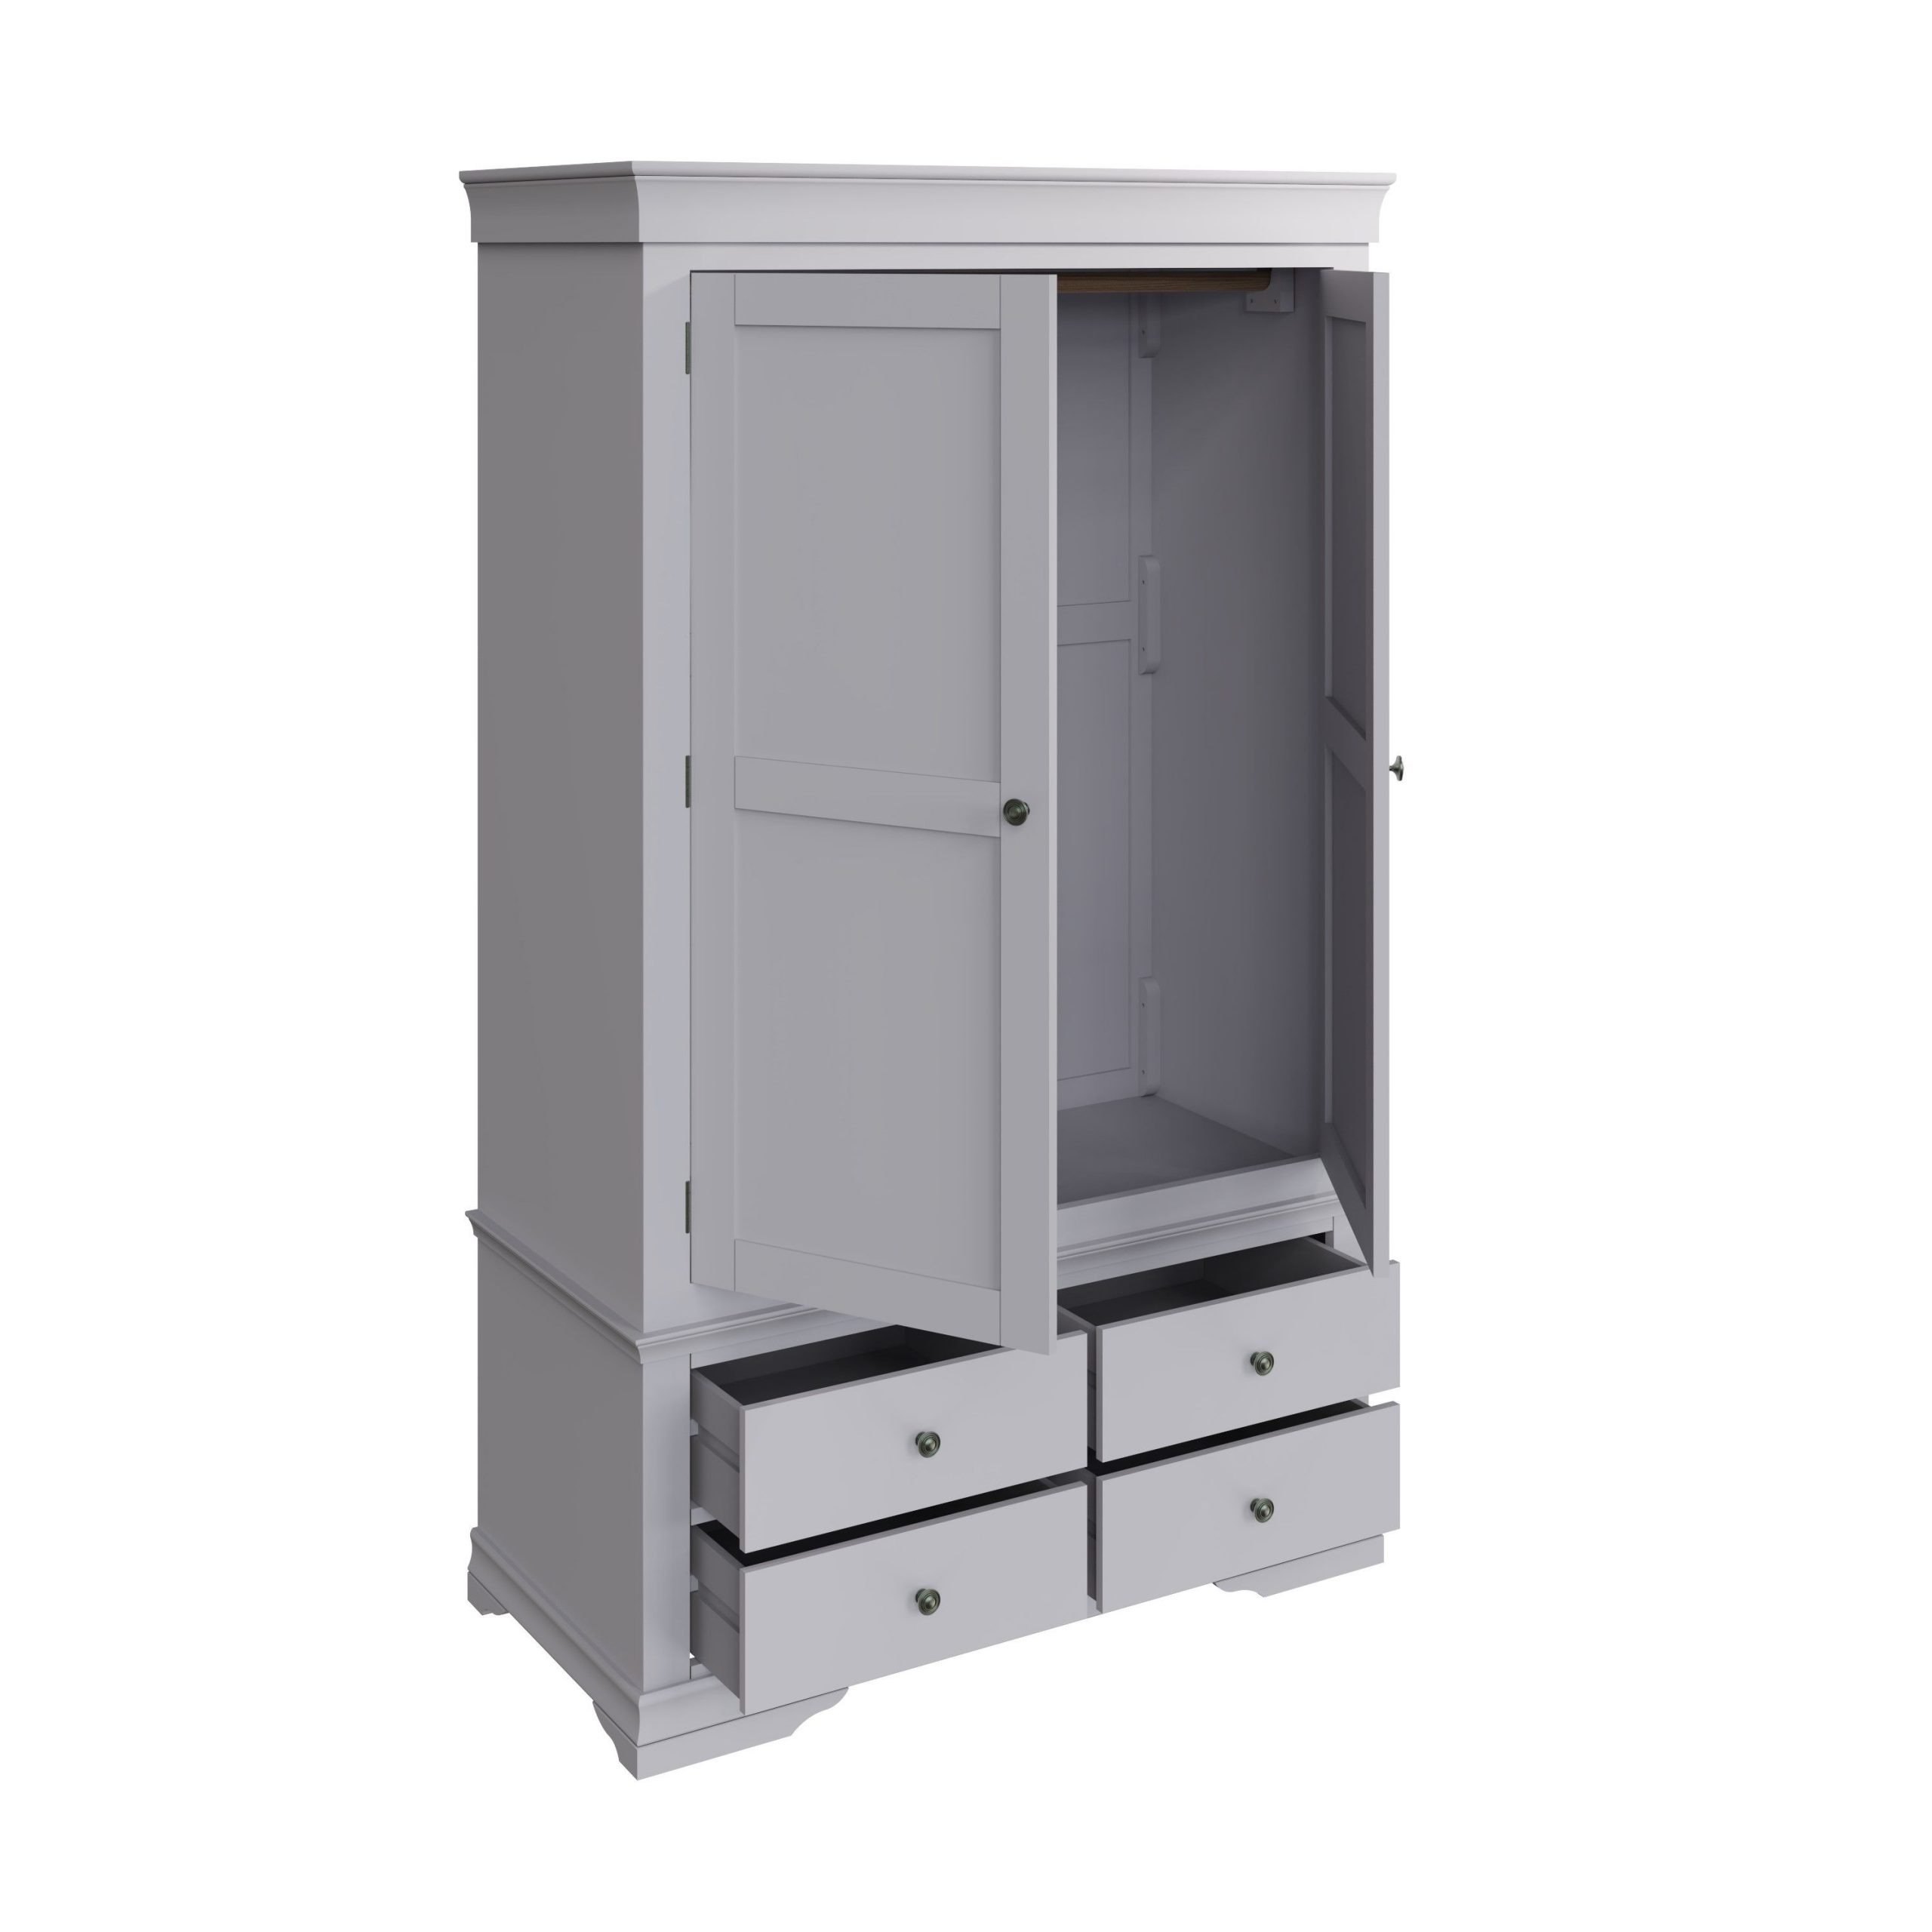 Isabelle Grey 2 Door 4 Drawer Wardrobe open all scaled